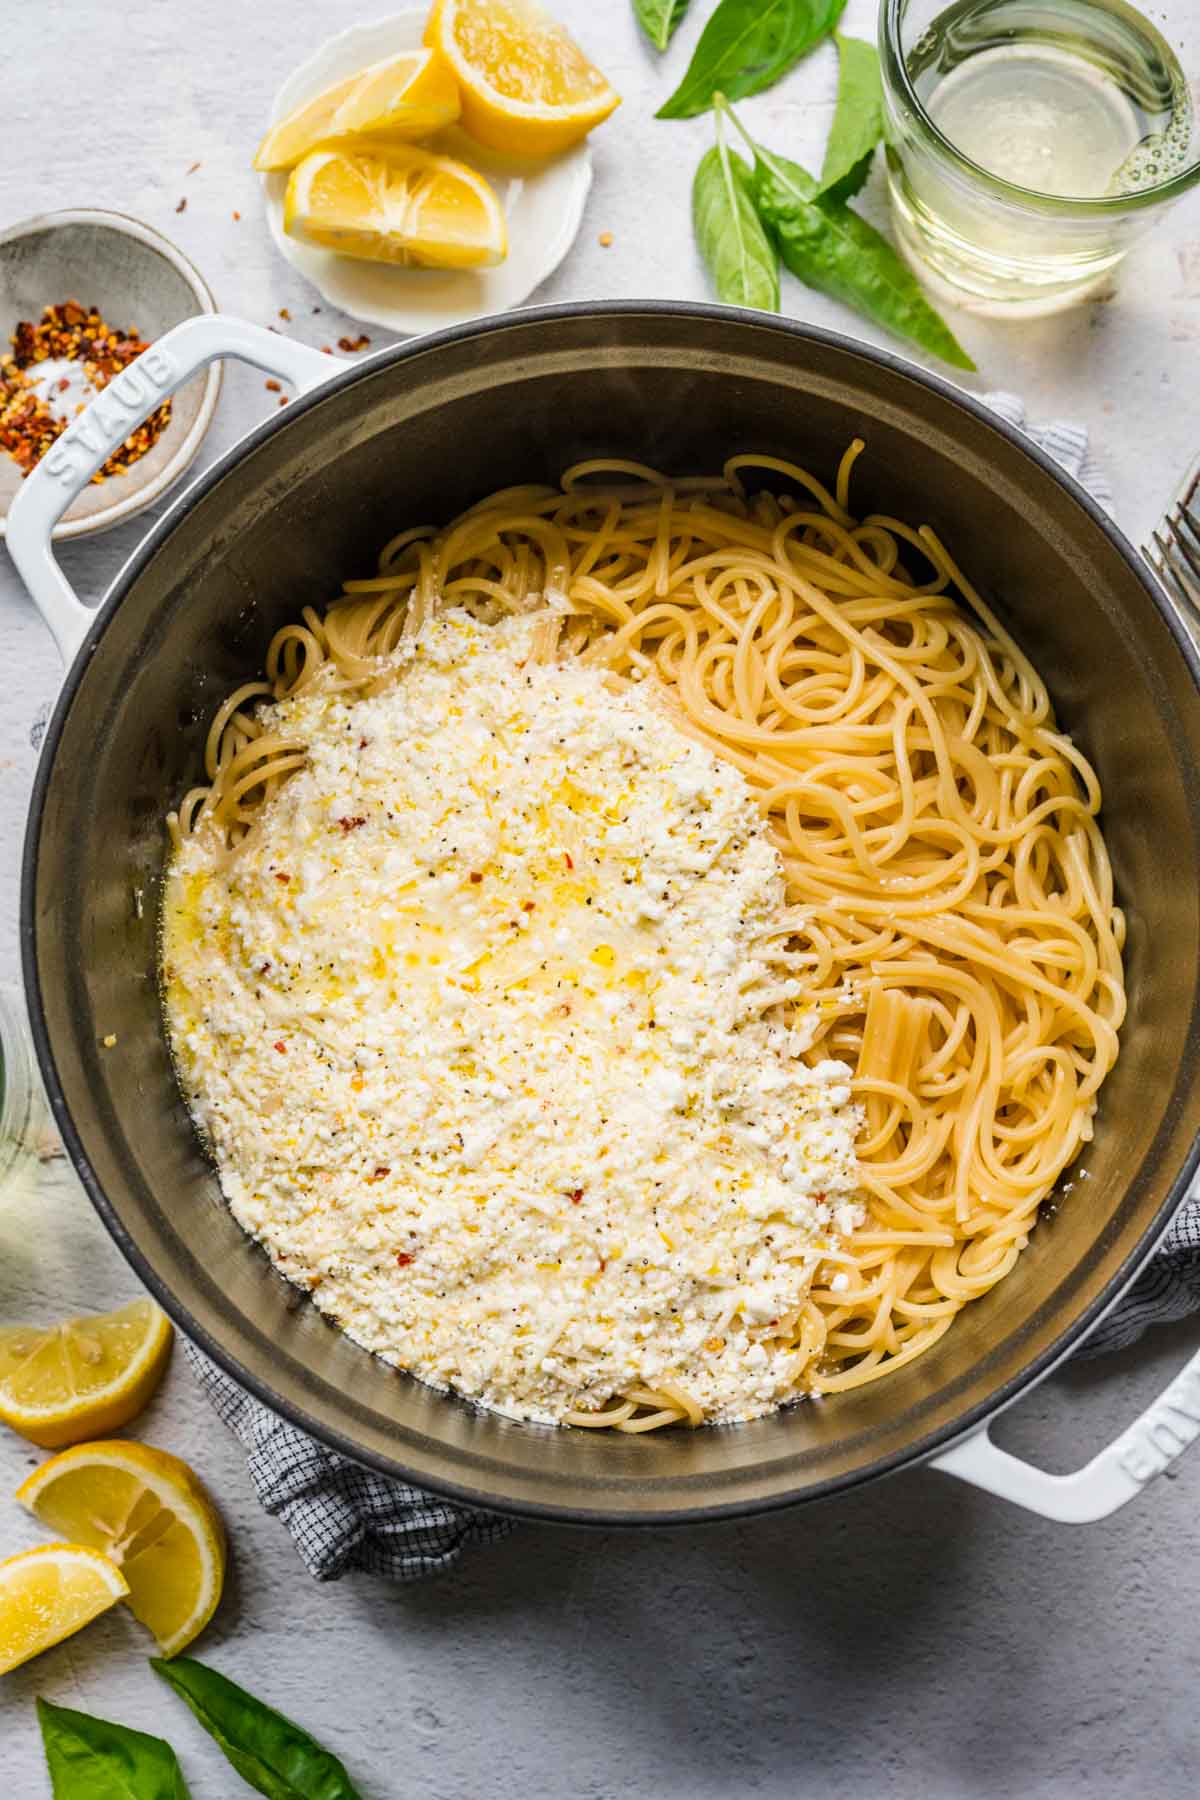 Lemon Ricotta Pasta cheese mixture added to cooked pasta